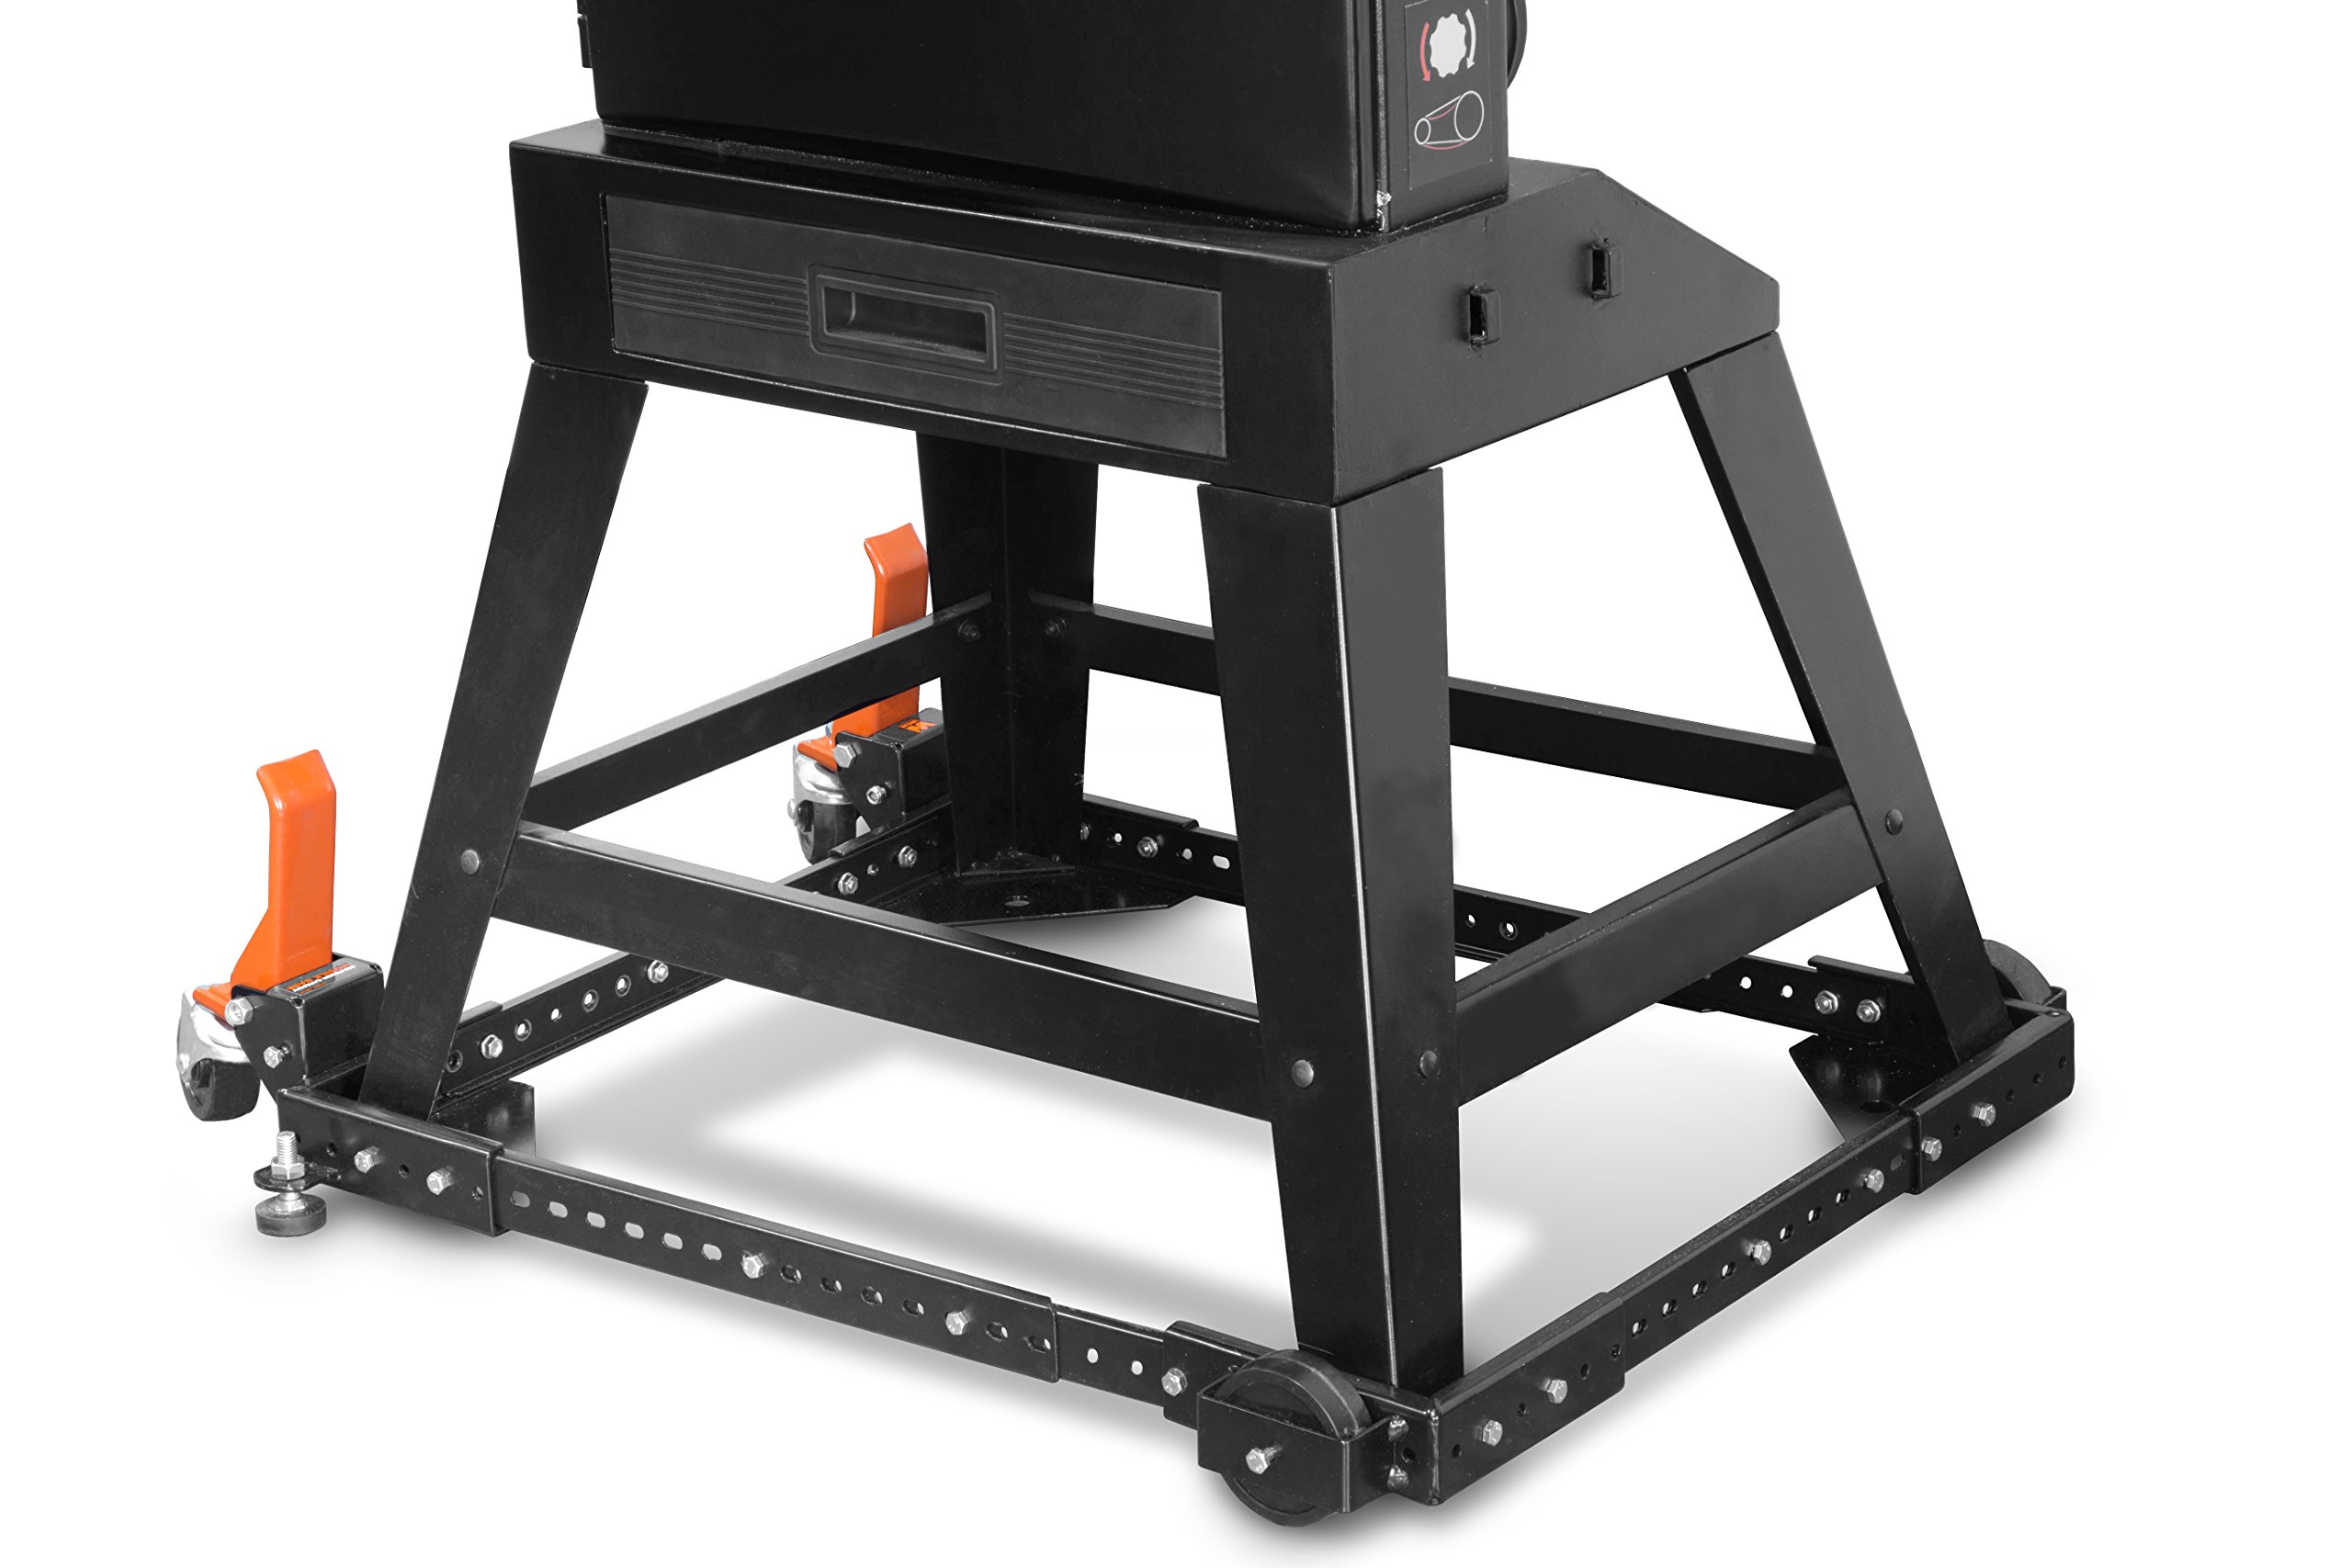 POWERTEC UT1002 Universal Tool Stand & WEN MB500 Heavy Duty 500-Pound Capacity Universal Mobile Base for Tools and Machines